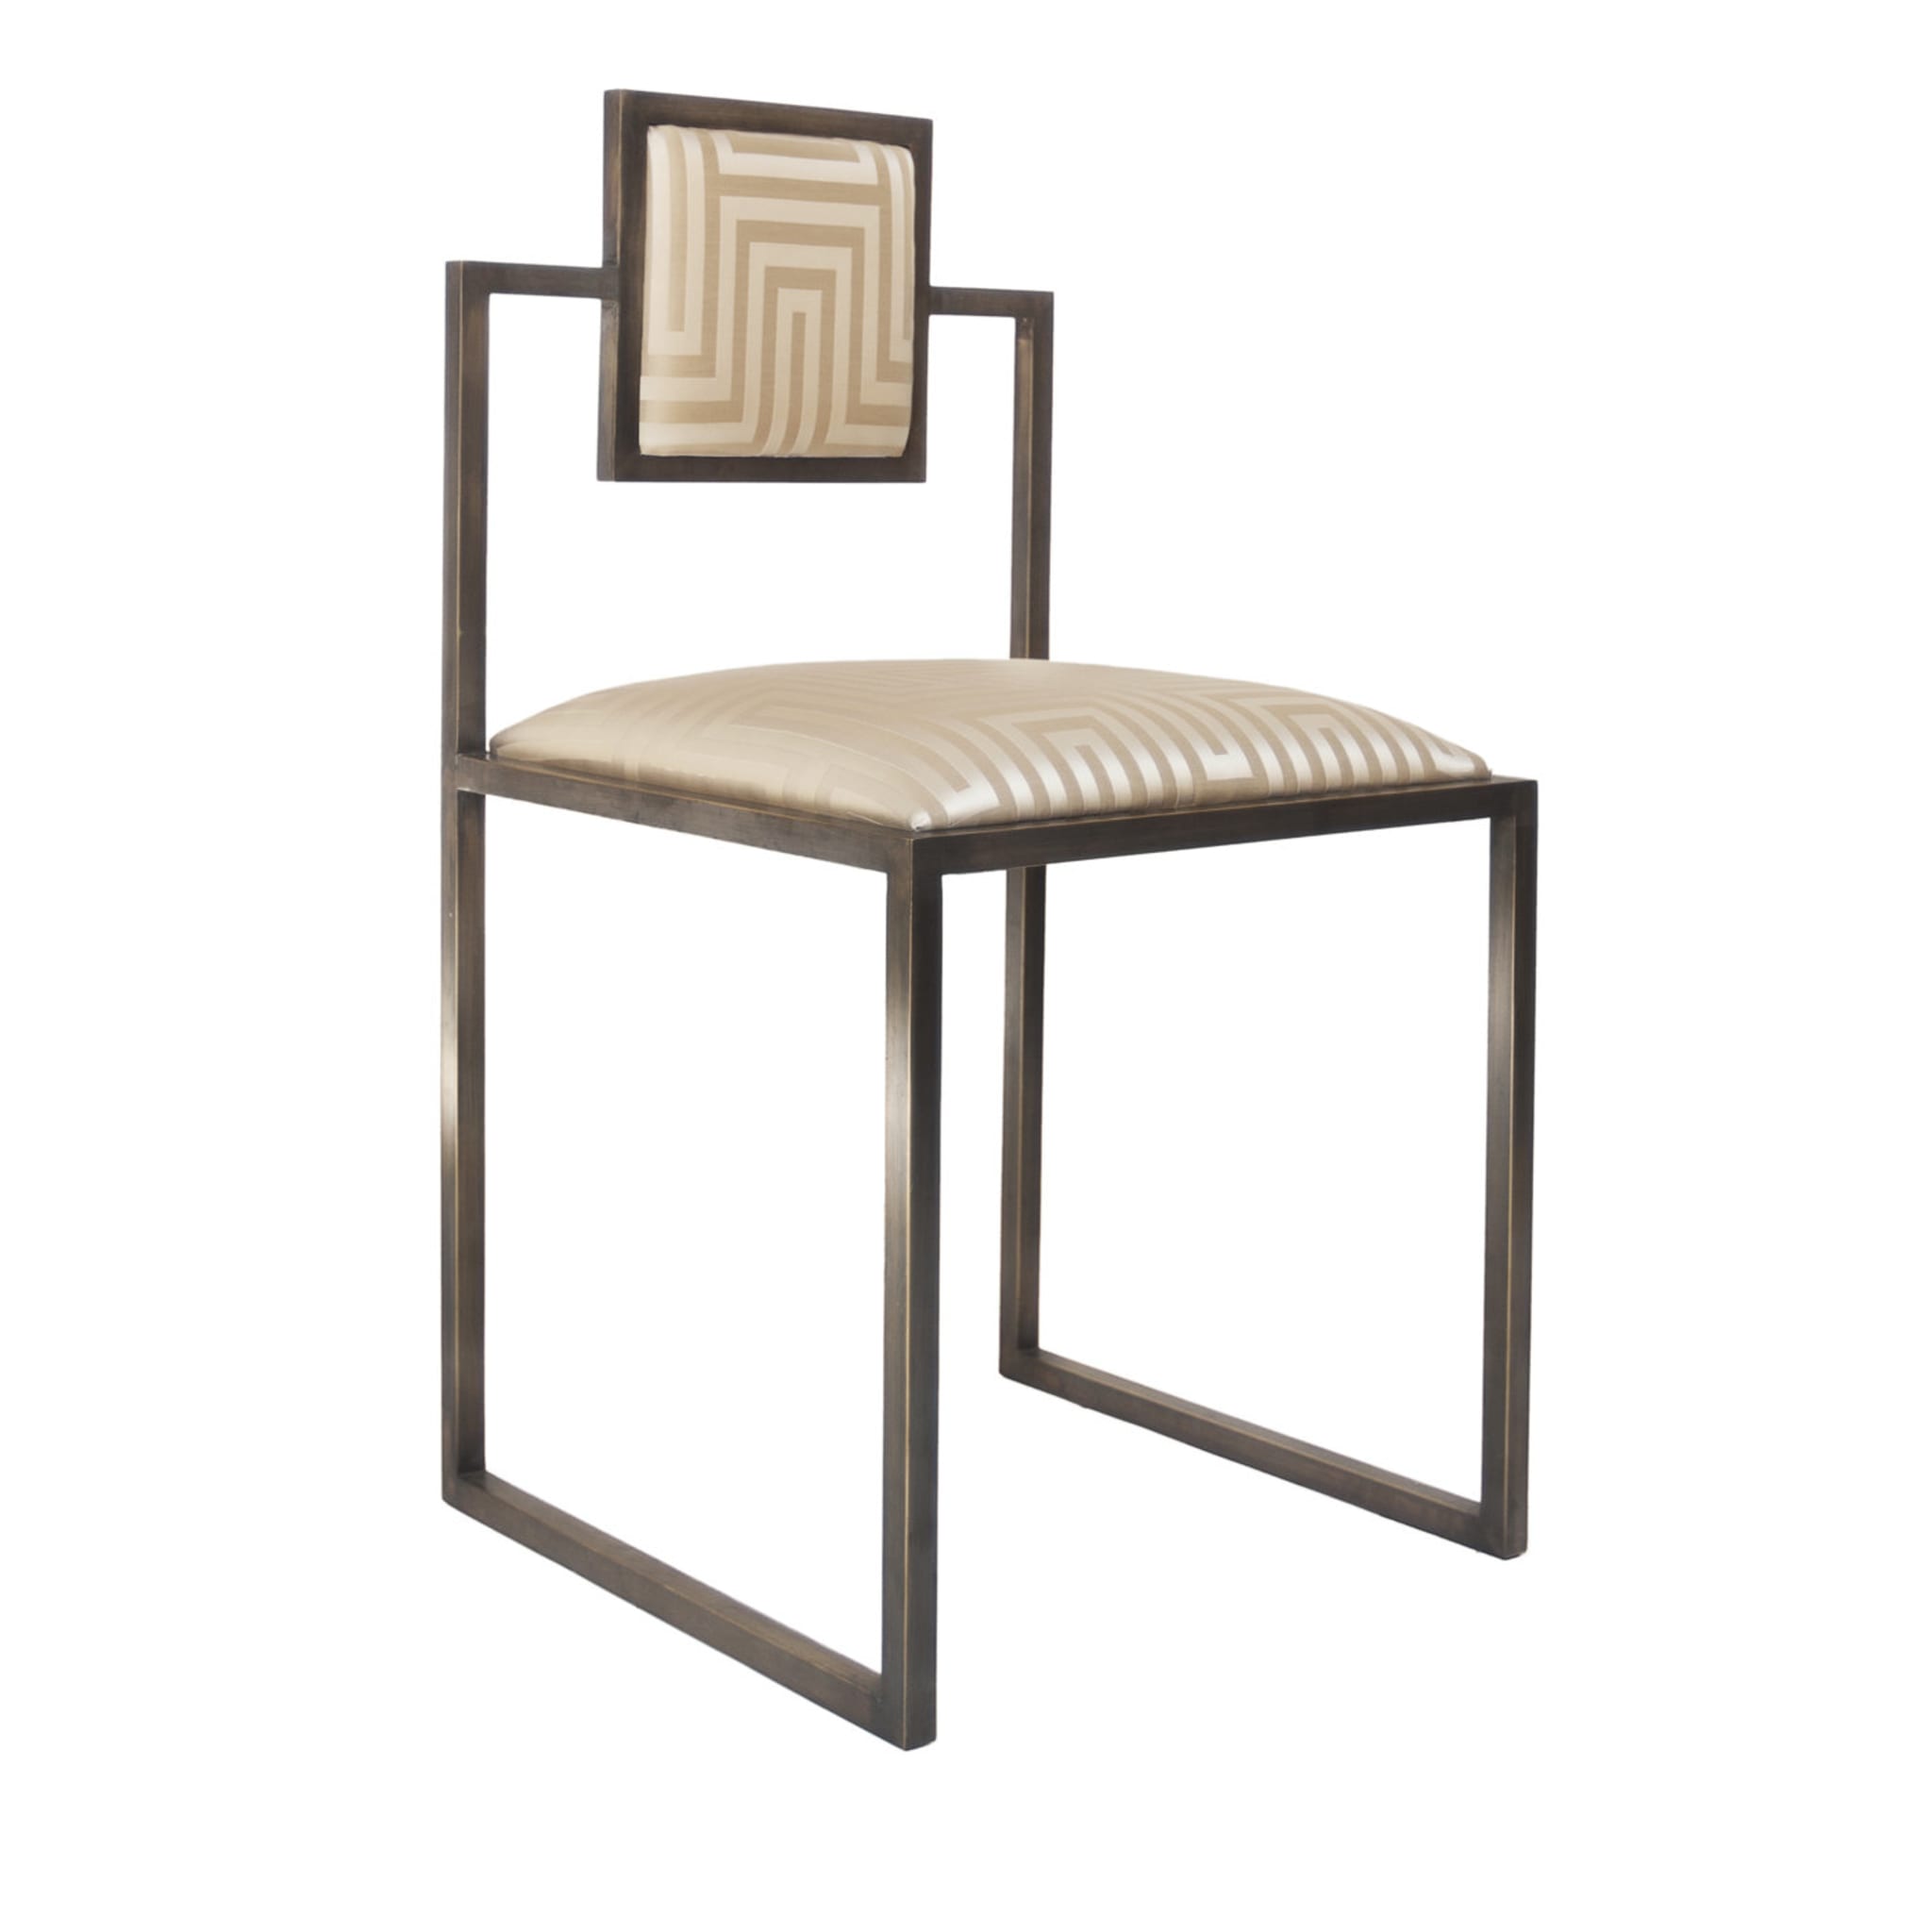 Champagne Square Chair - Main view